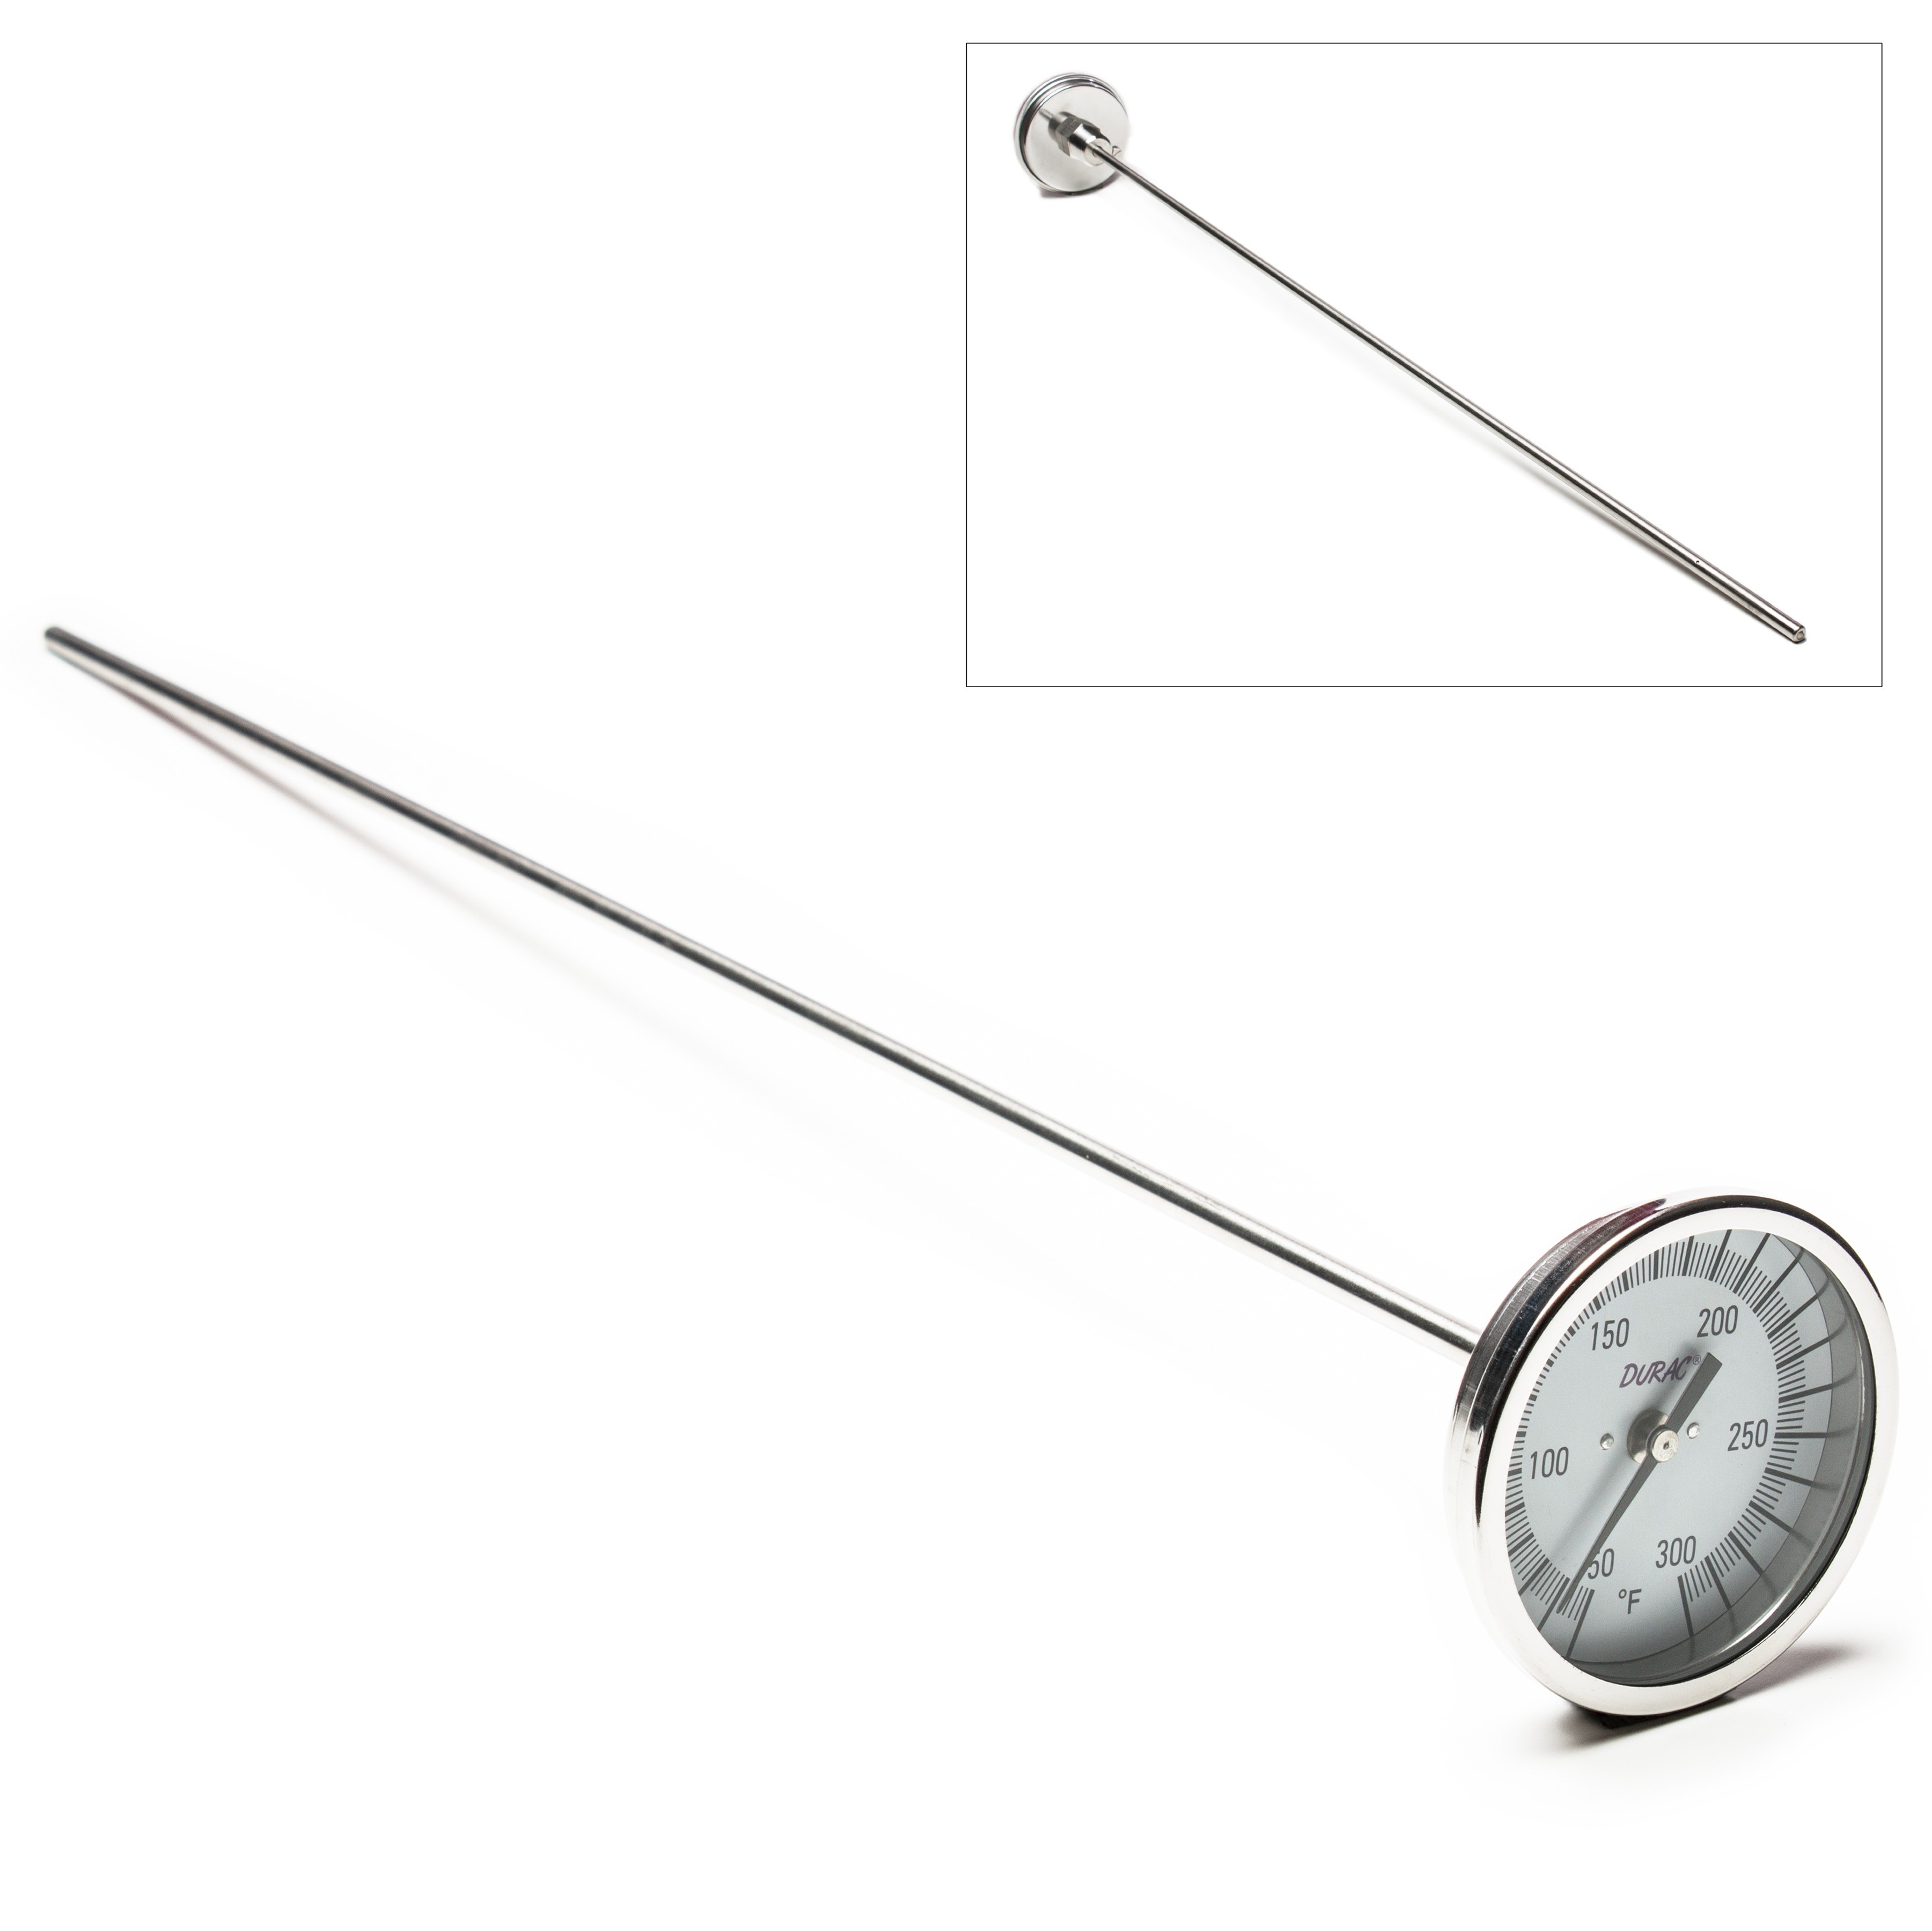 SP Bel-Art, H-B DURAC Bi-Metallic Dial Thermometer; 50 to 300F, 1/2 in. NPT Threaded Connection, 75mm Dial